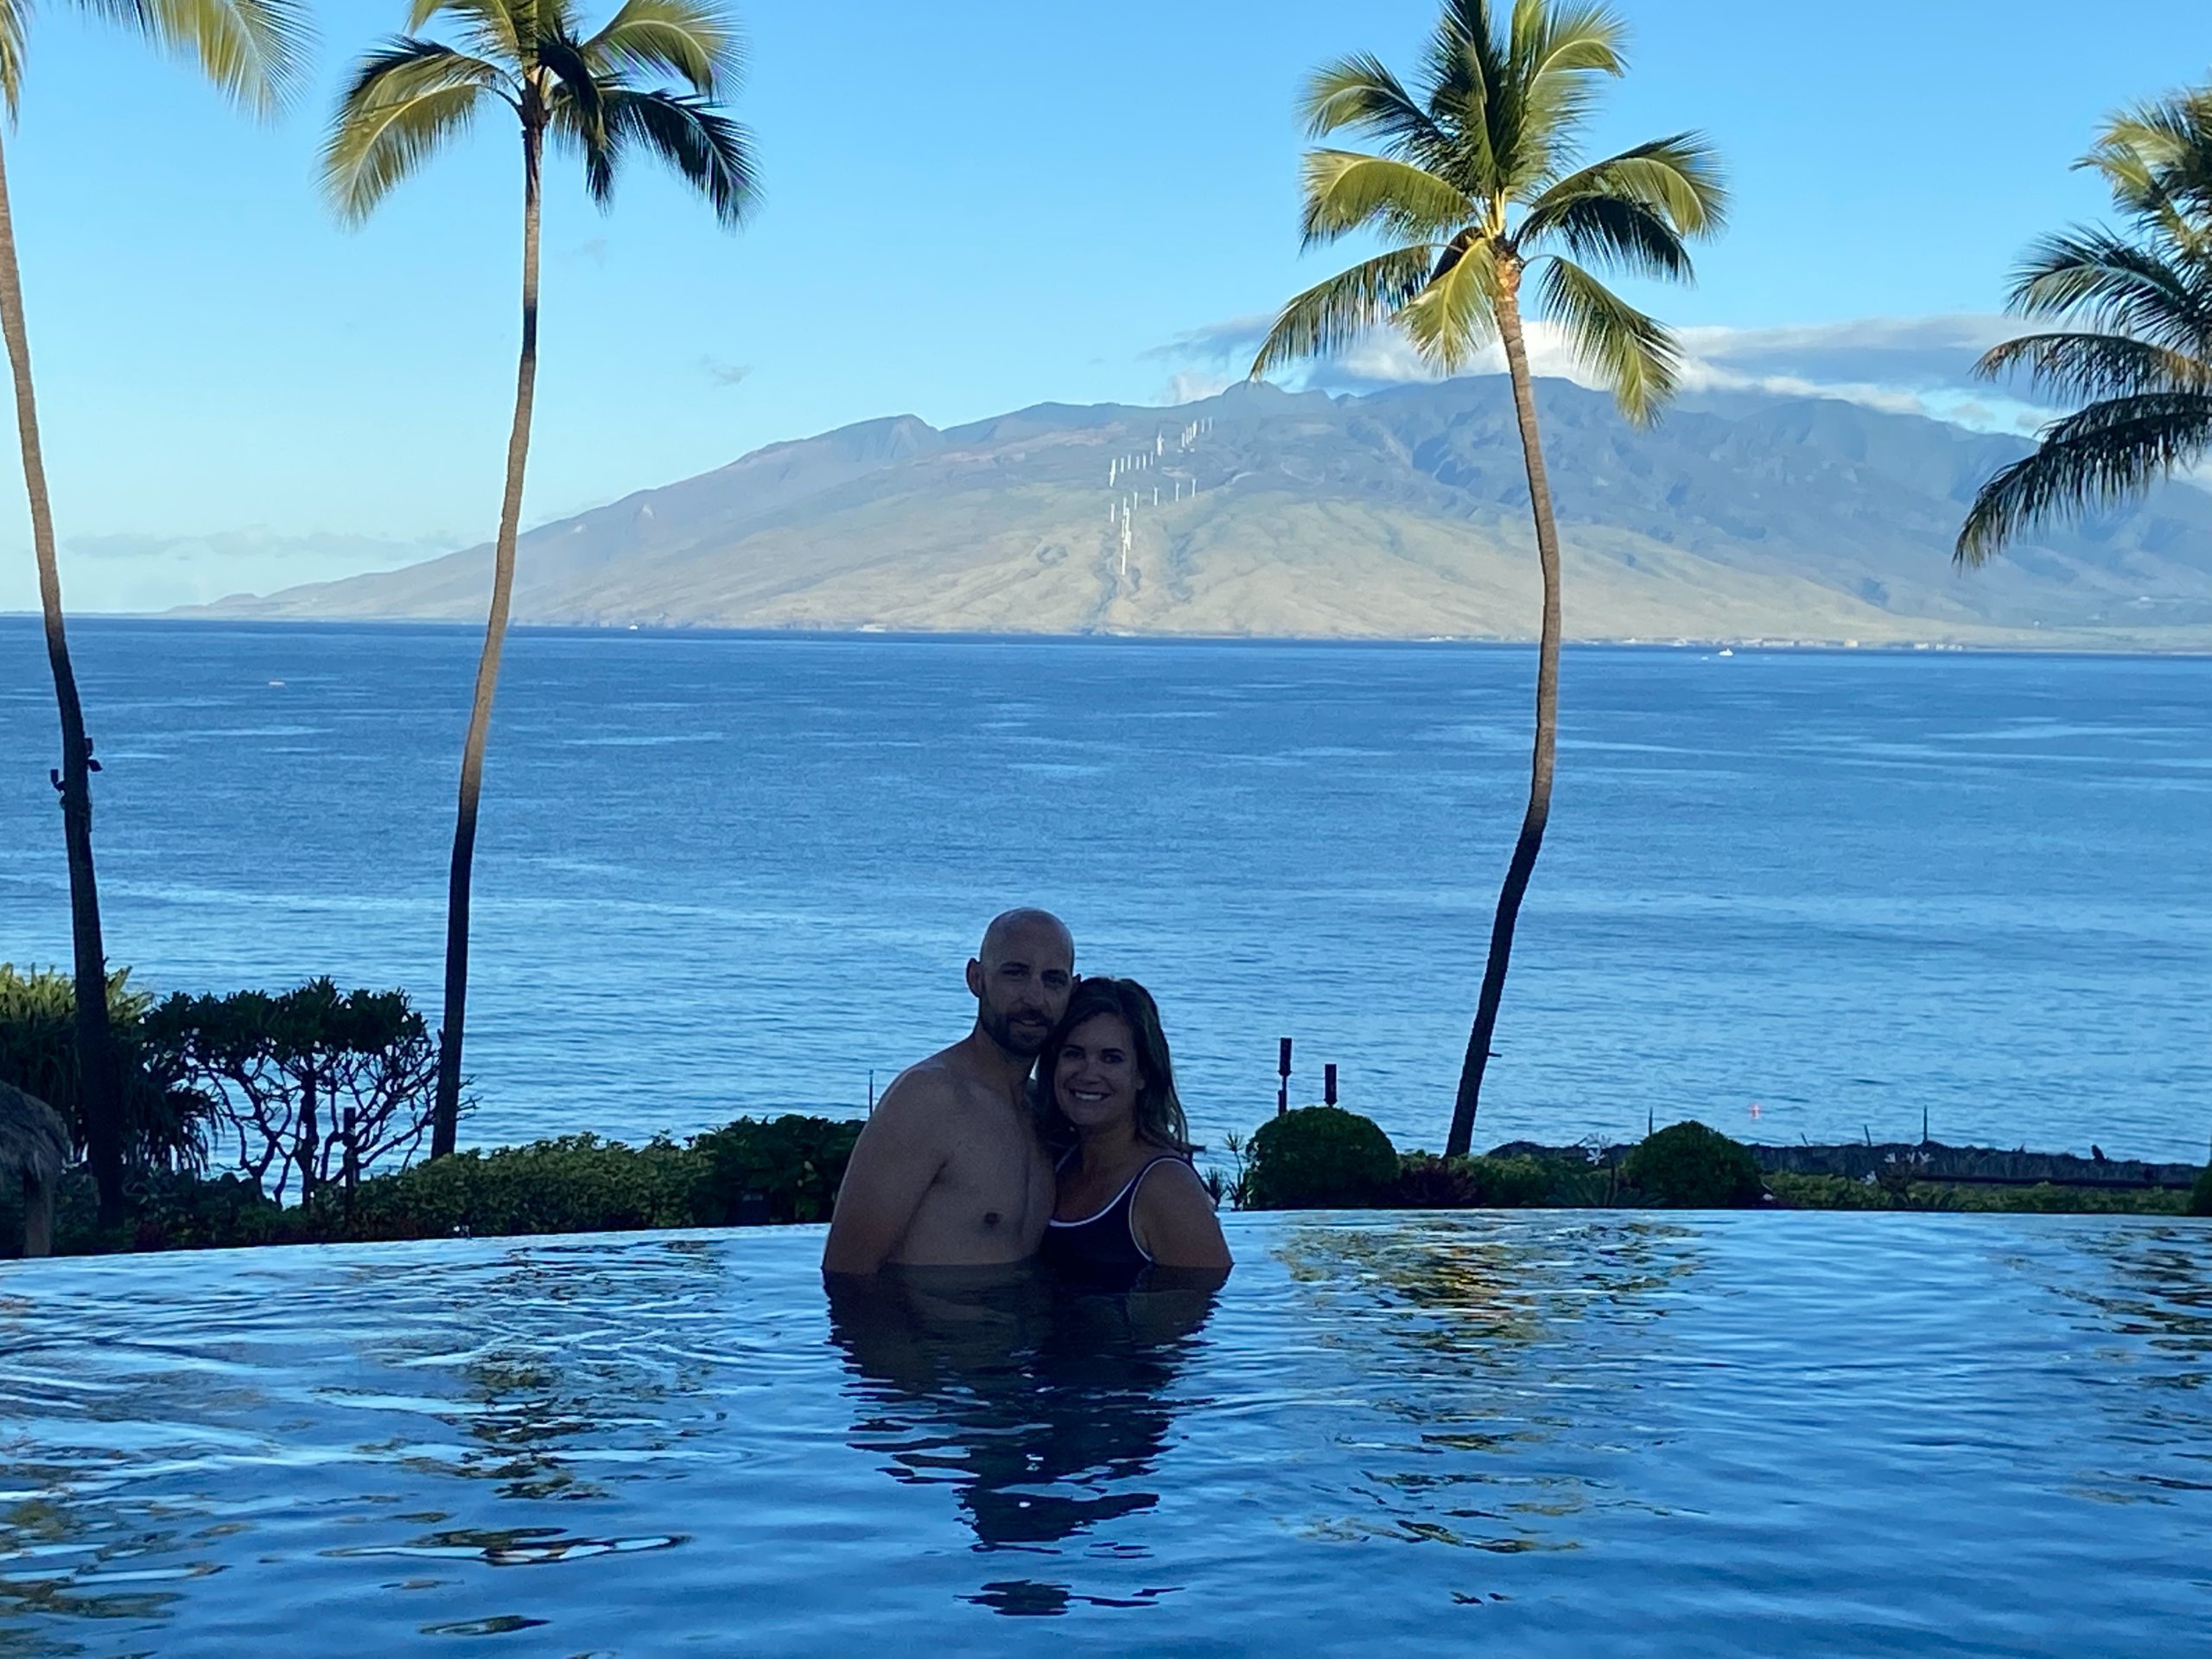 Man and woman in infinity pool